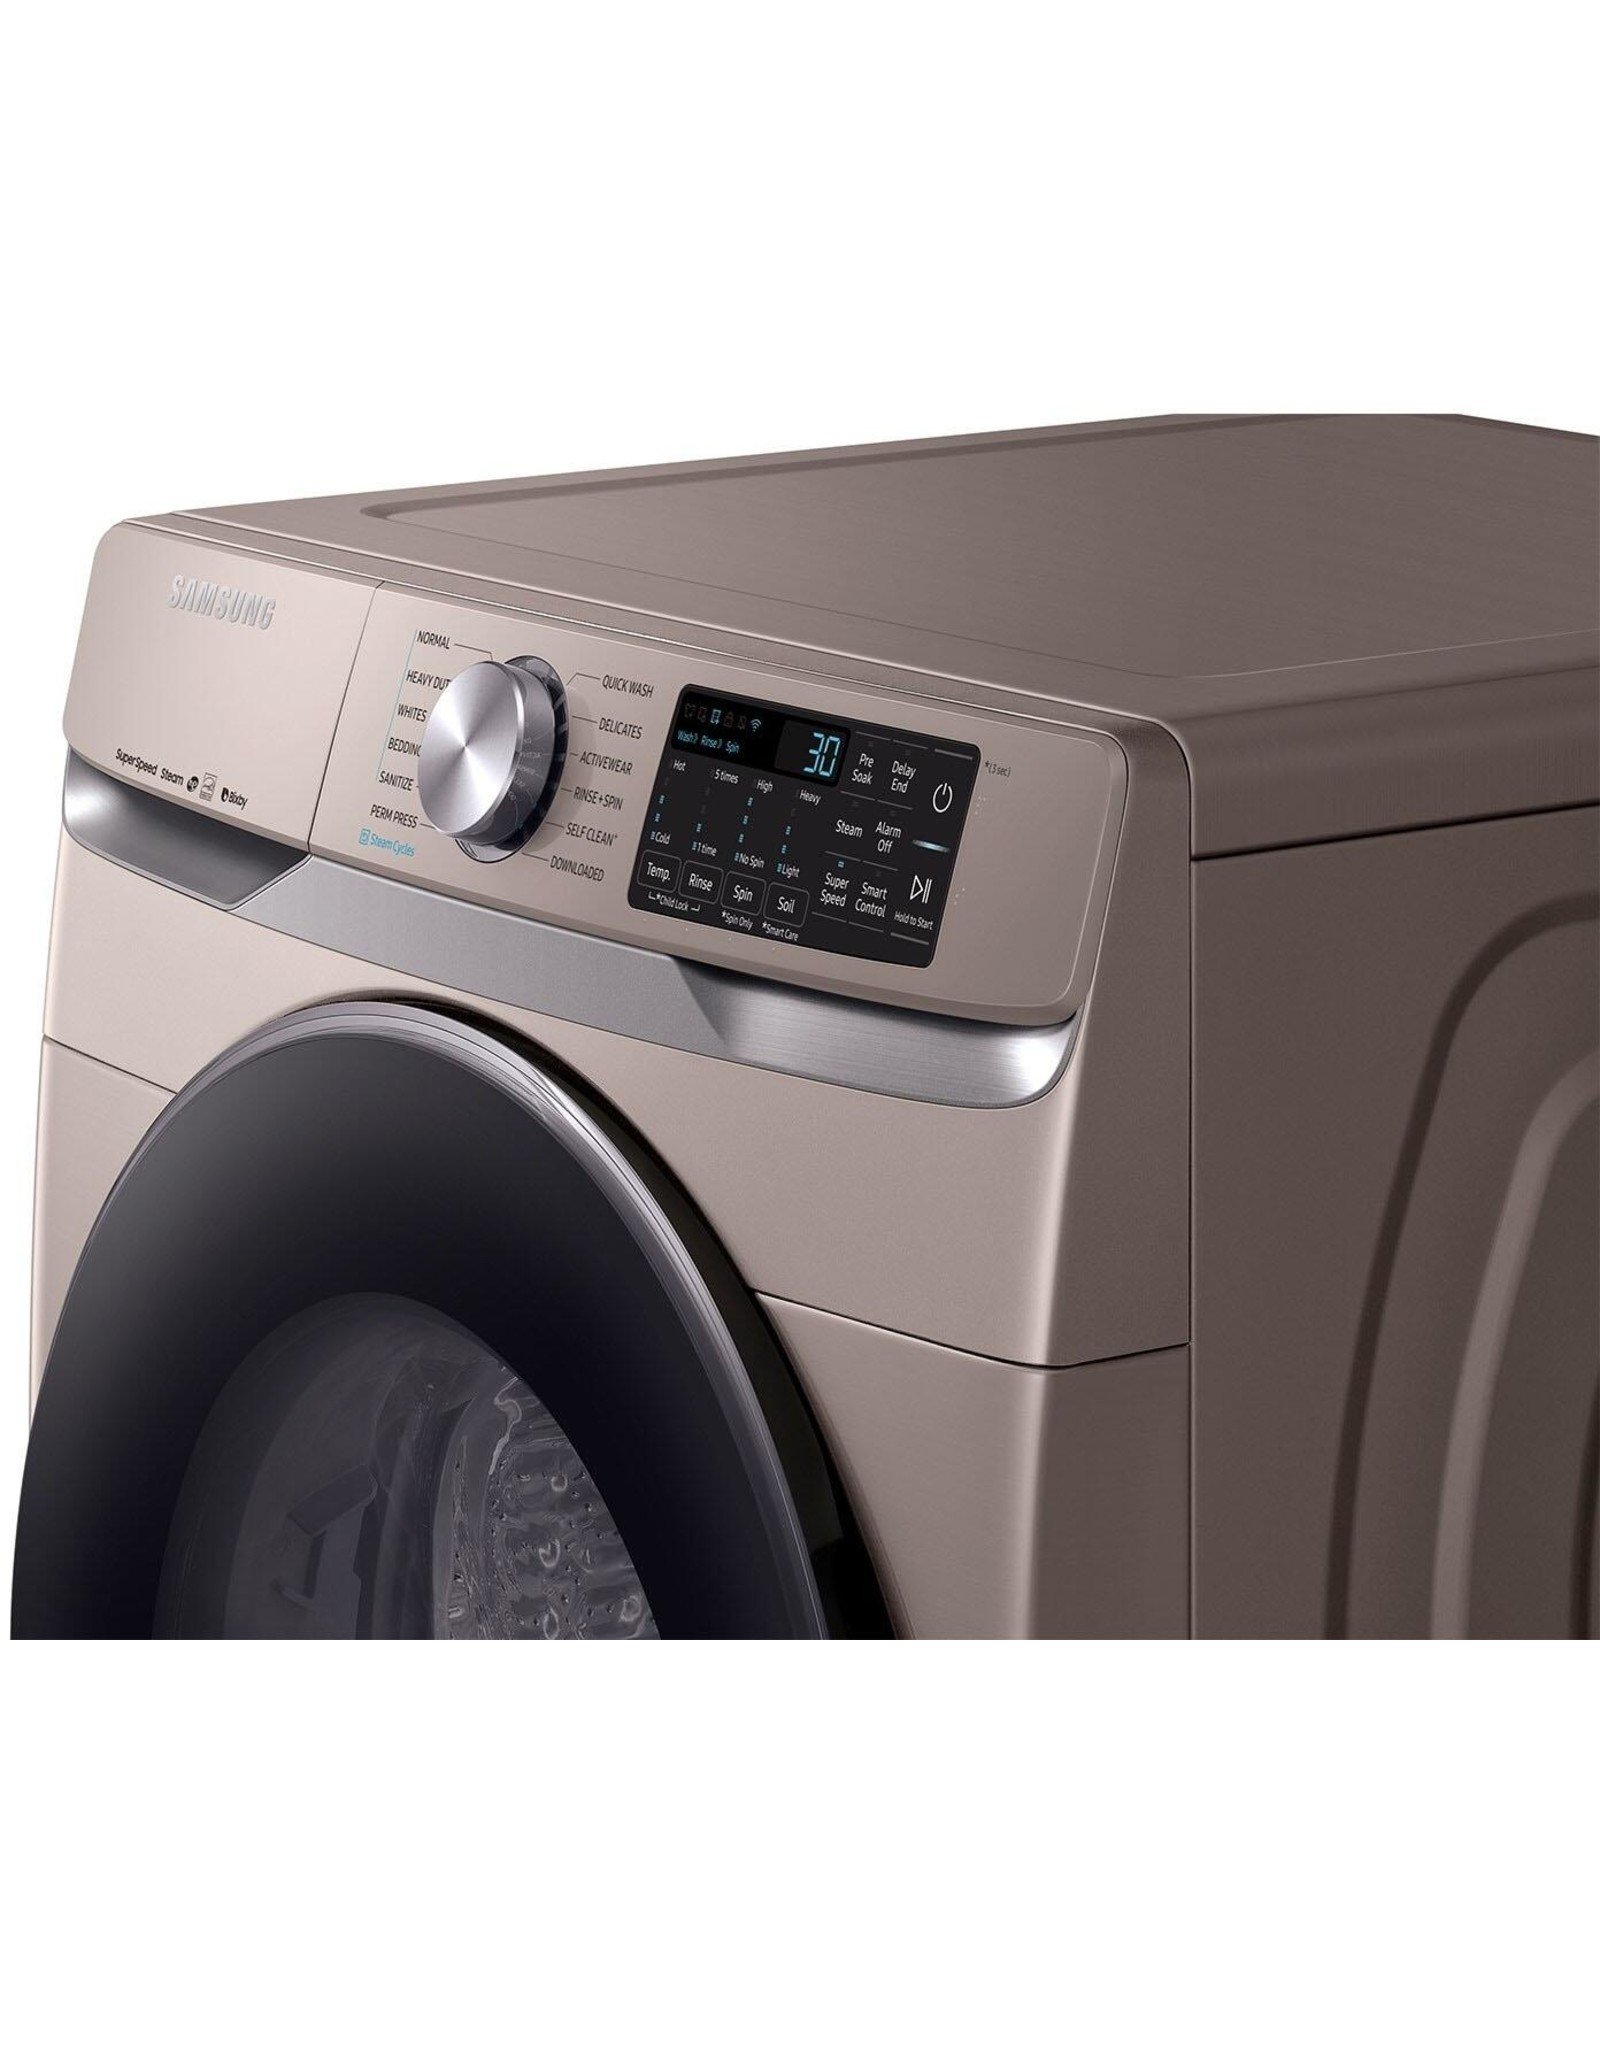 SAMSUNG 4.5 cu. ft. High-Efficiency Champagne Front Load Washing Machine with Steam and Super Speed